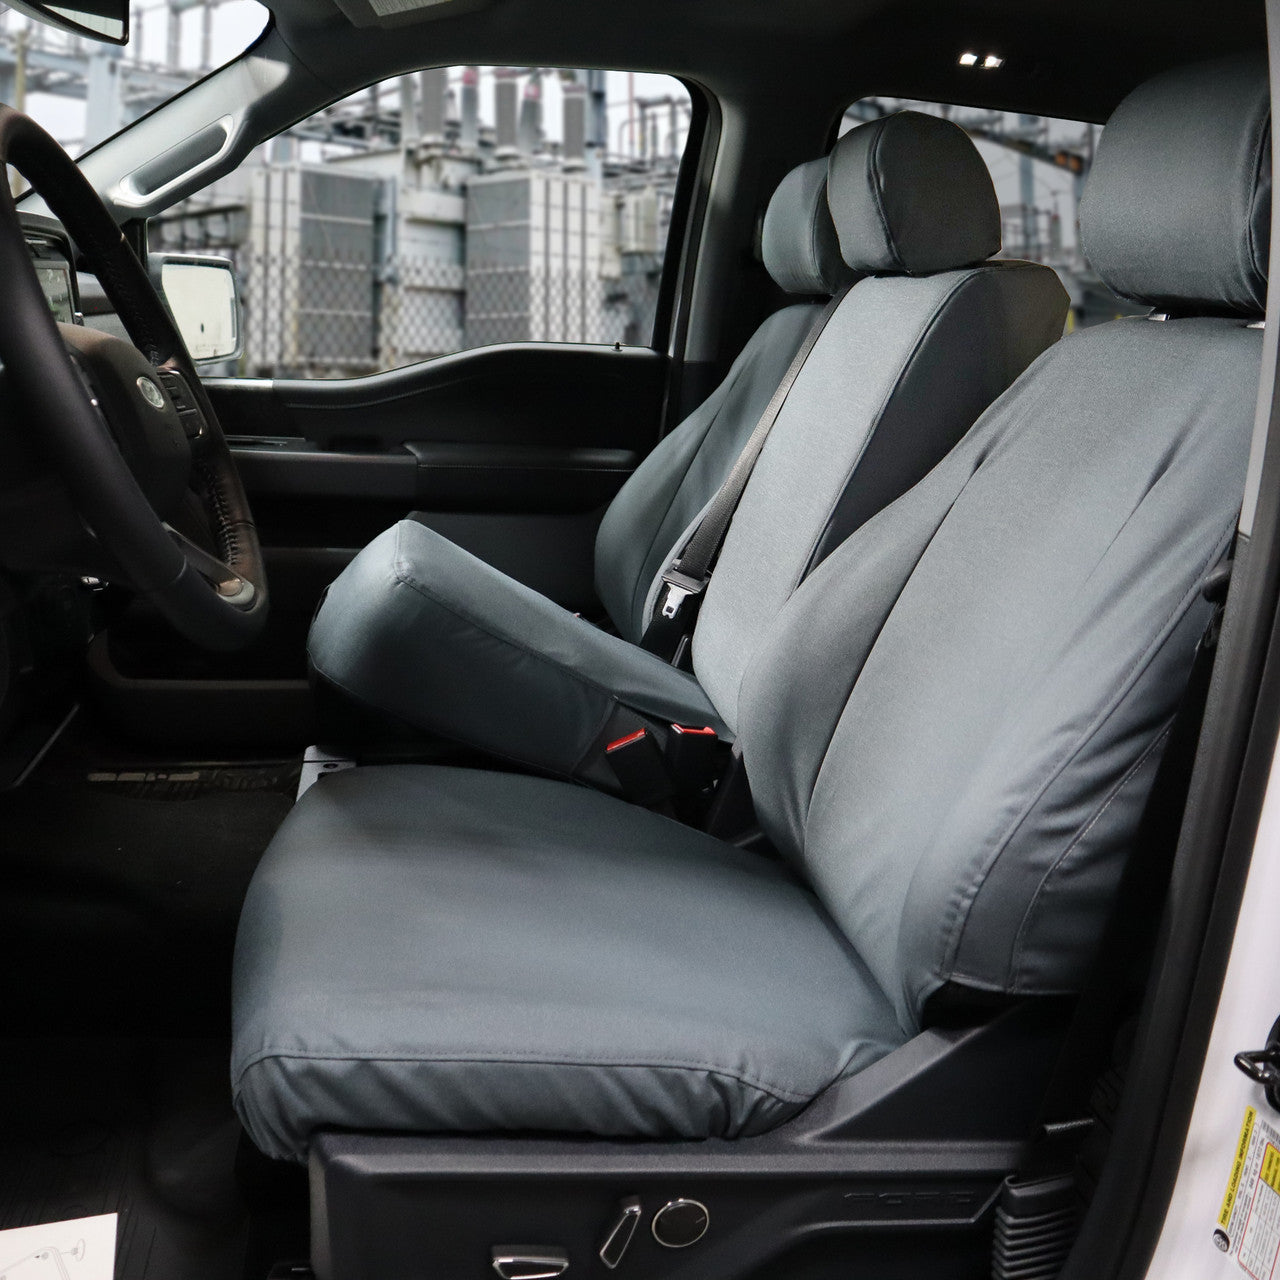 2021 Ford F150 with gray TigerTough seat covers, console bottom open.